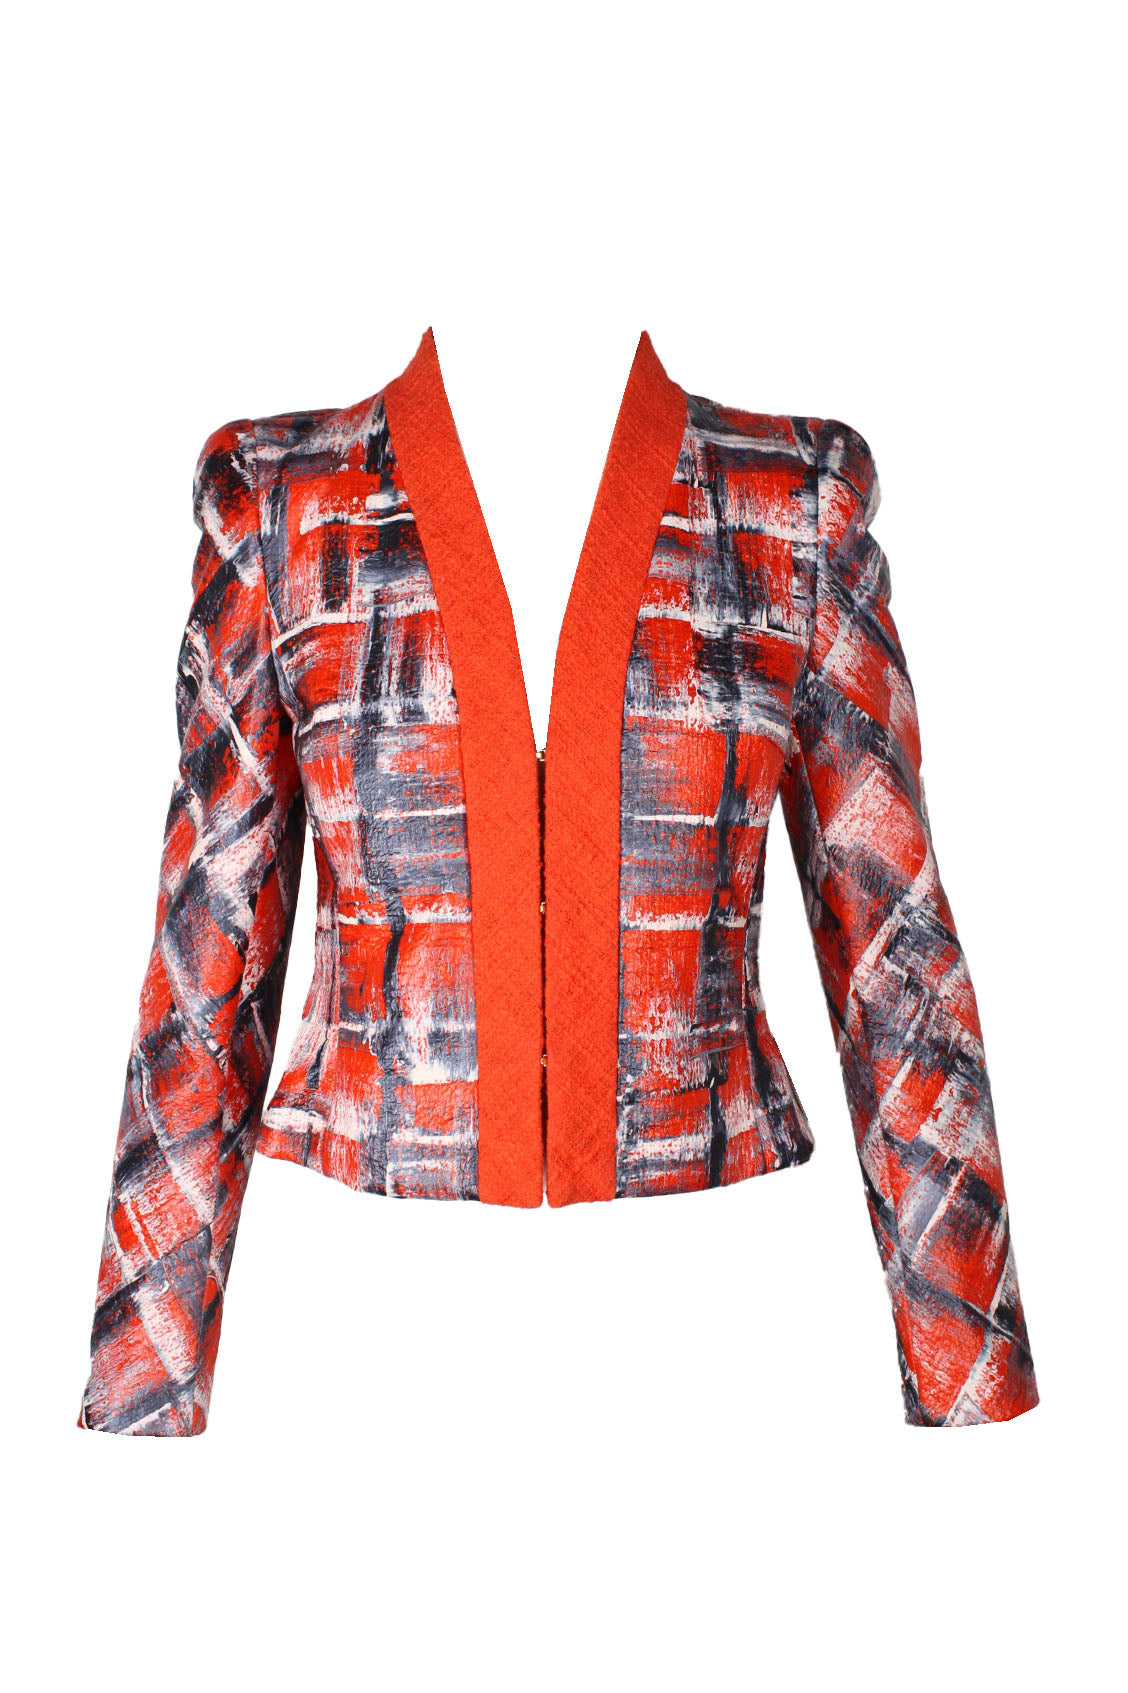 description: escada red tones abstract painting blazer. features red hem at center, hook closure, padded shoulders fitted style, and cropped length. 